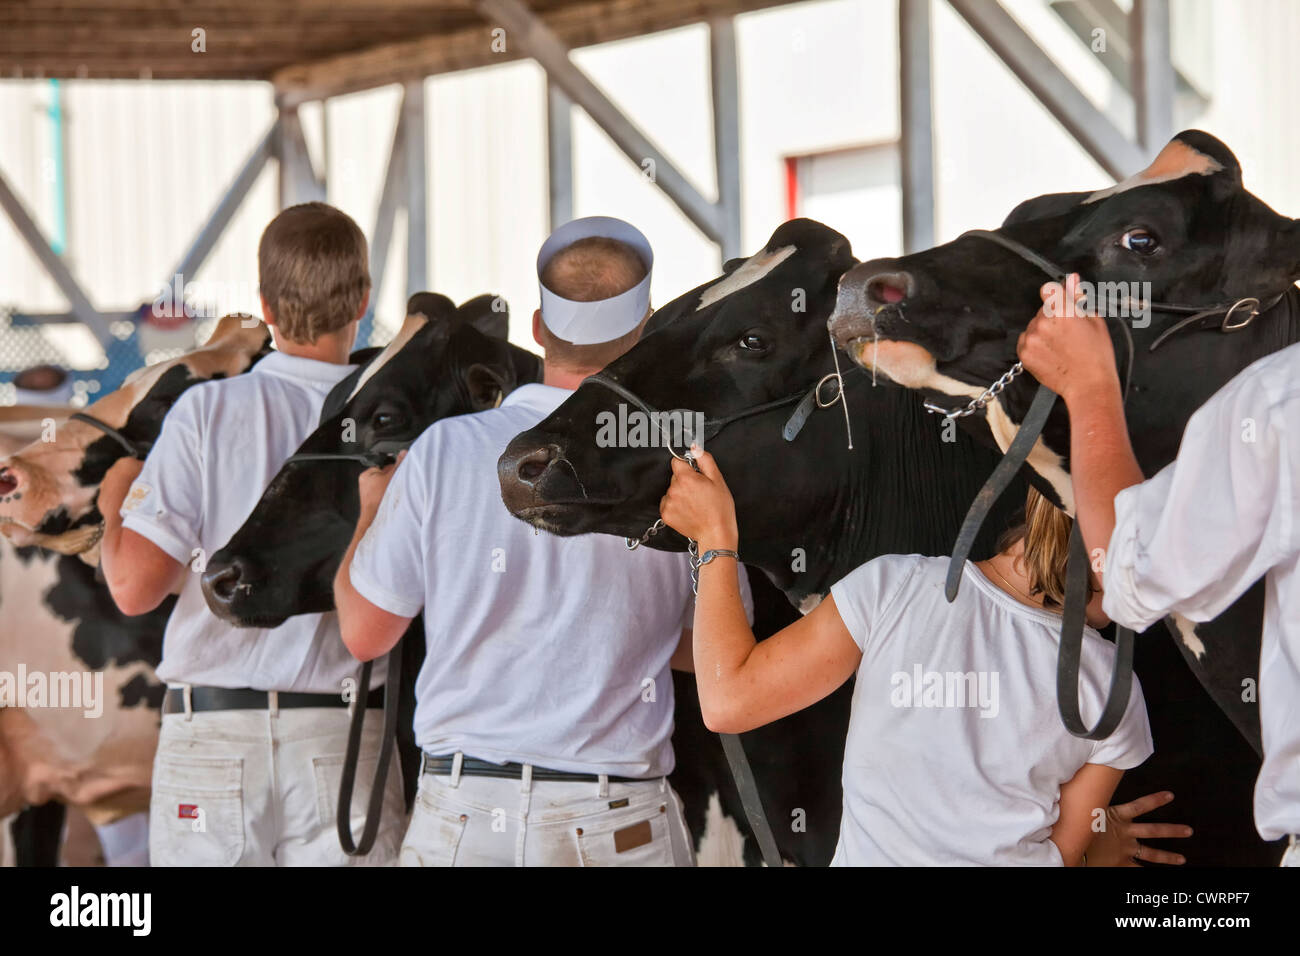 Competitors in the dairy show at the Evangeline Agricultural Exhibition and Acadian Festival in Prince Edward Island, Canada, Stock Photo